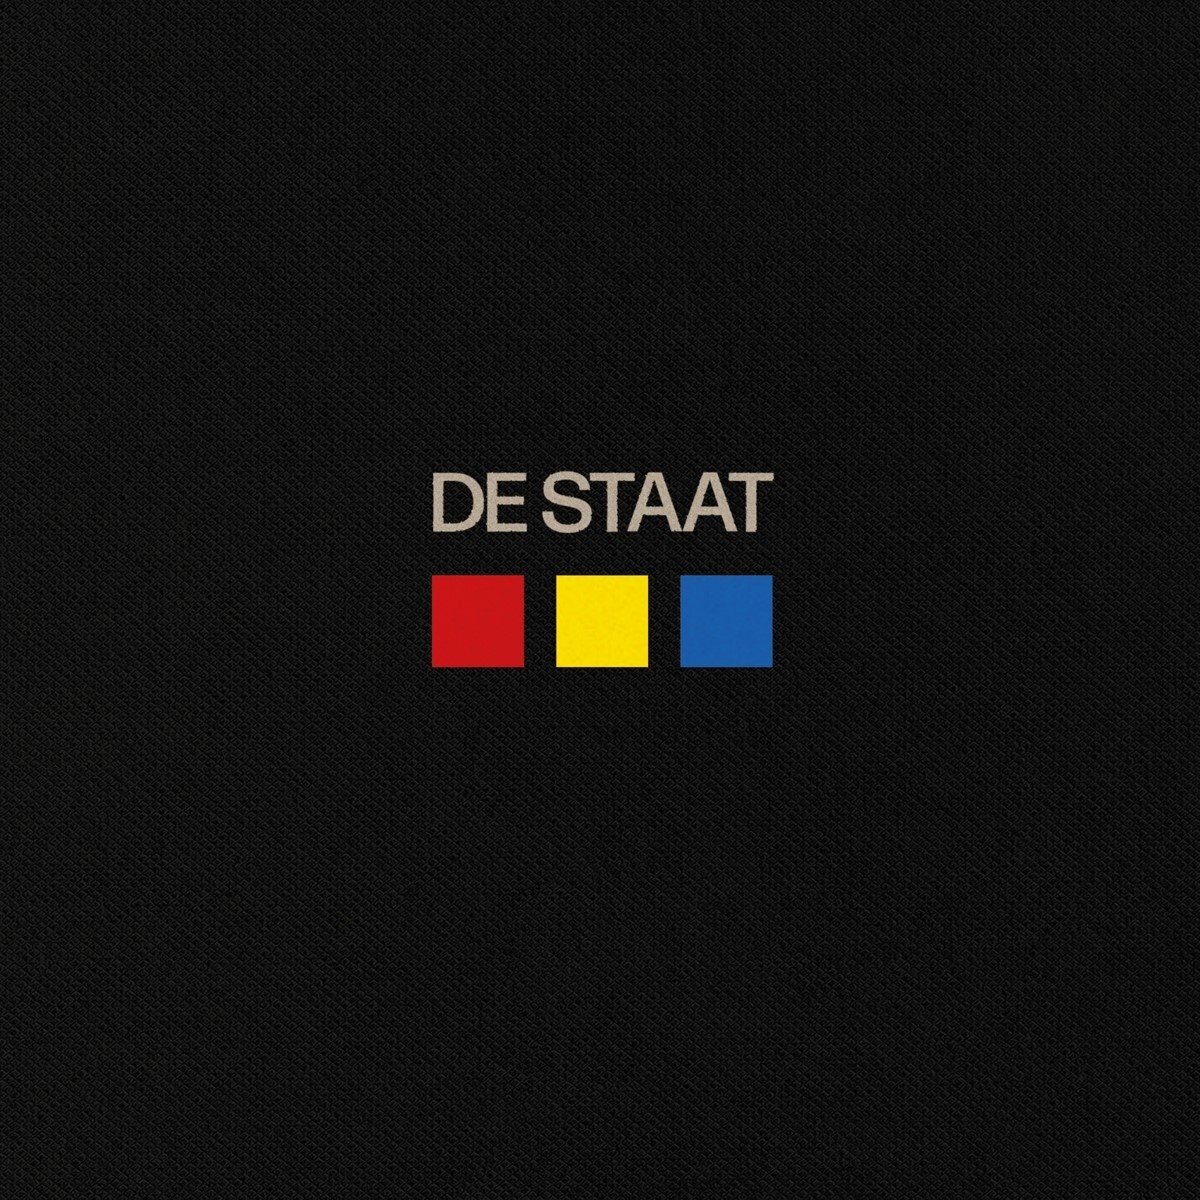 Universal Music Nederland De Staat - Red, Yellow, Blue (3 CD) (Limited Edition)